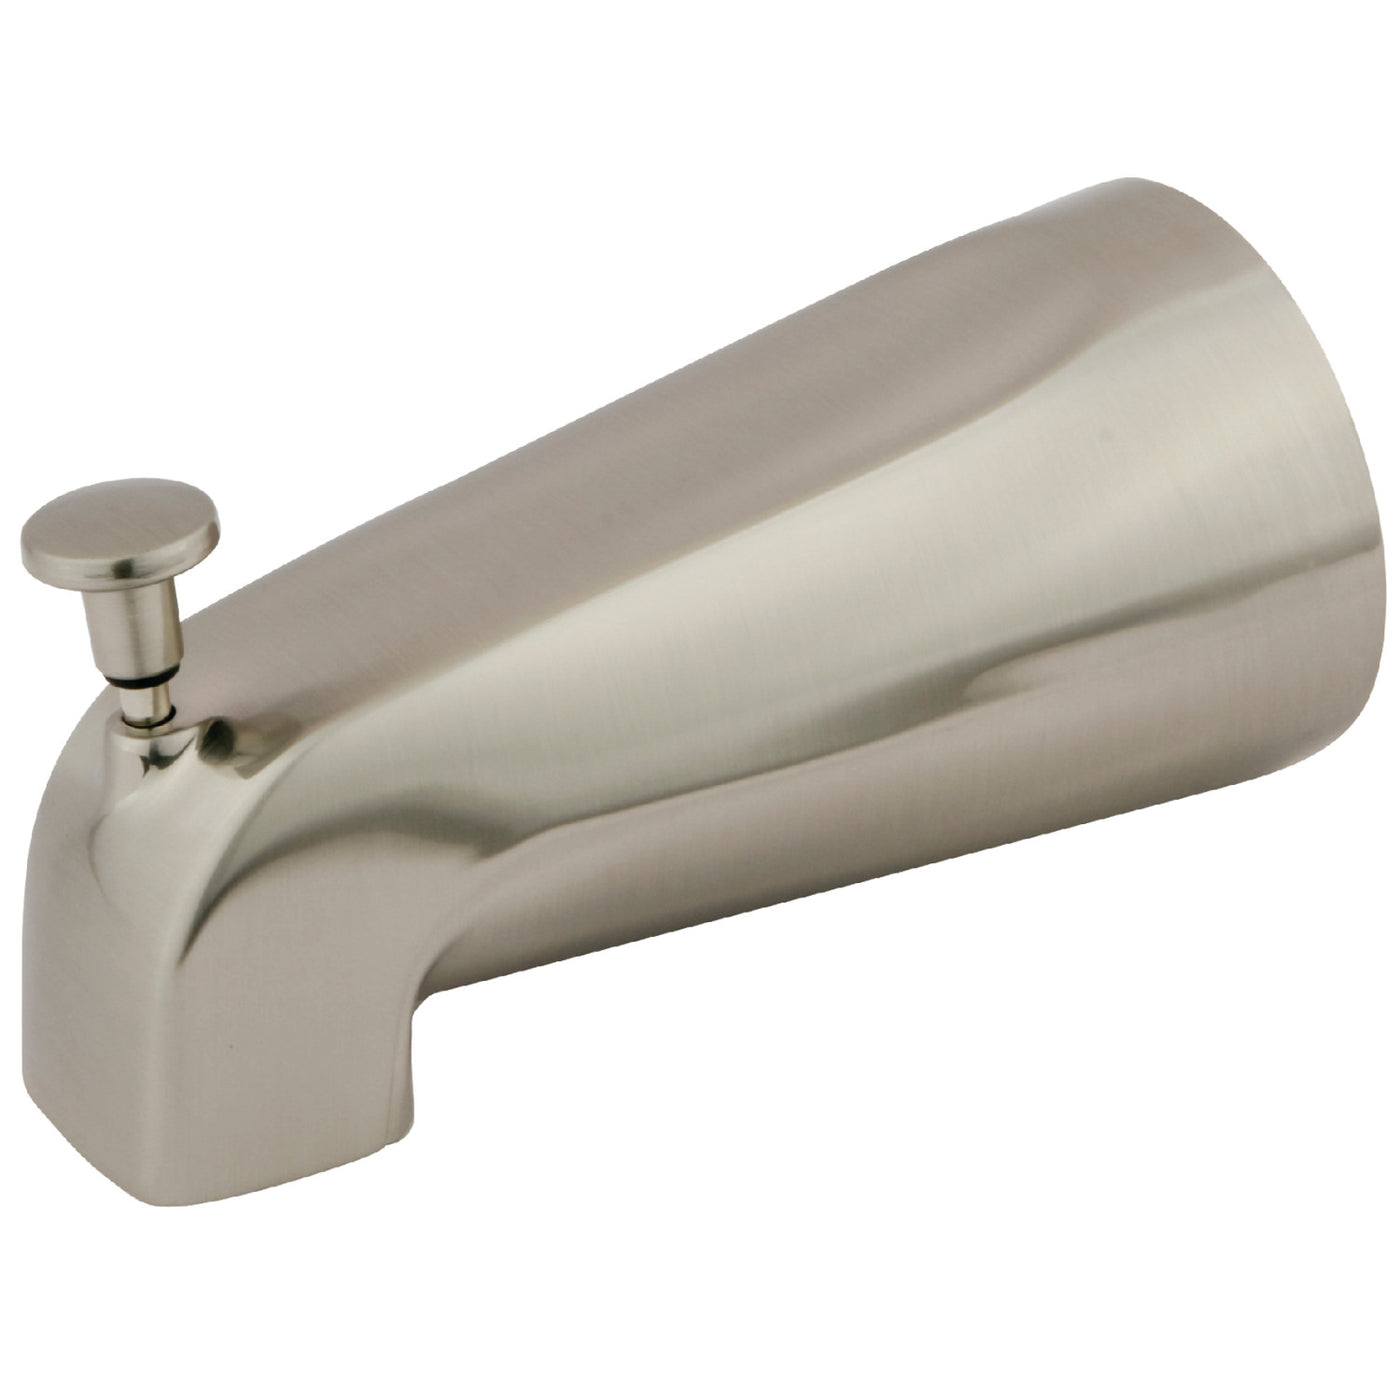 Elements of Design DK189A8 5-1/4 Inch Zinc Tub Spout with Diverter, Brushed Nickel